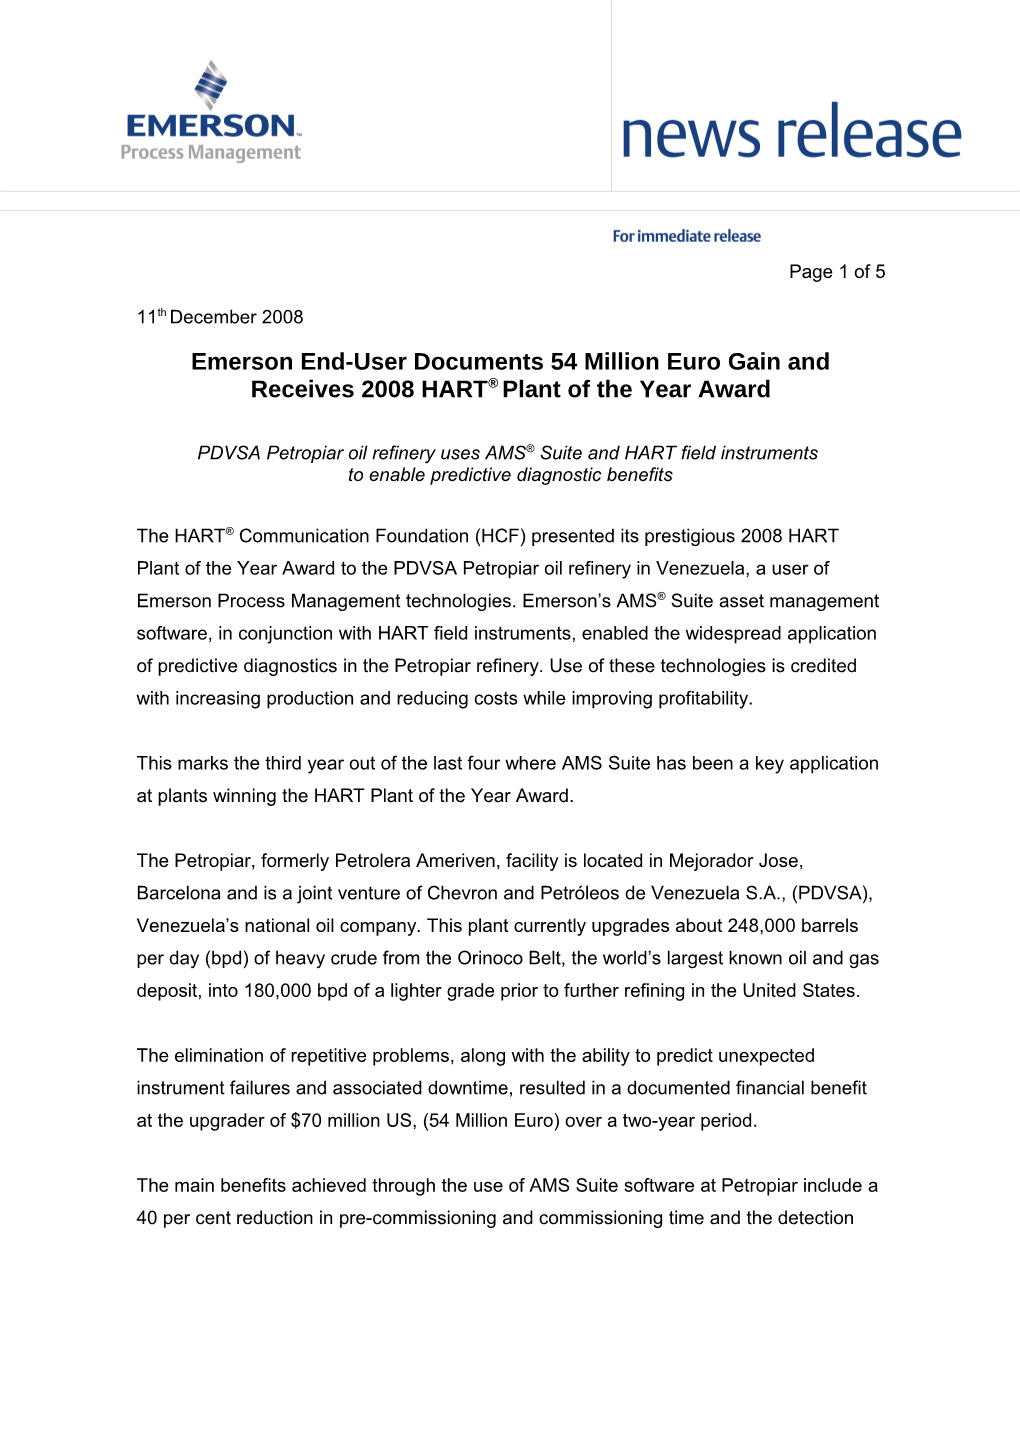 Emerson End-User Documents 54 Million Euro Gain and Receives 2008 HART Plant of the Year Award